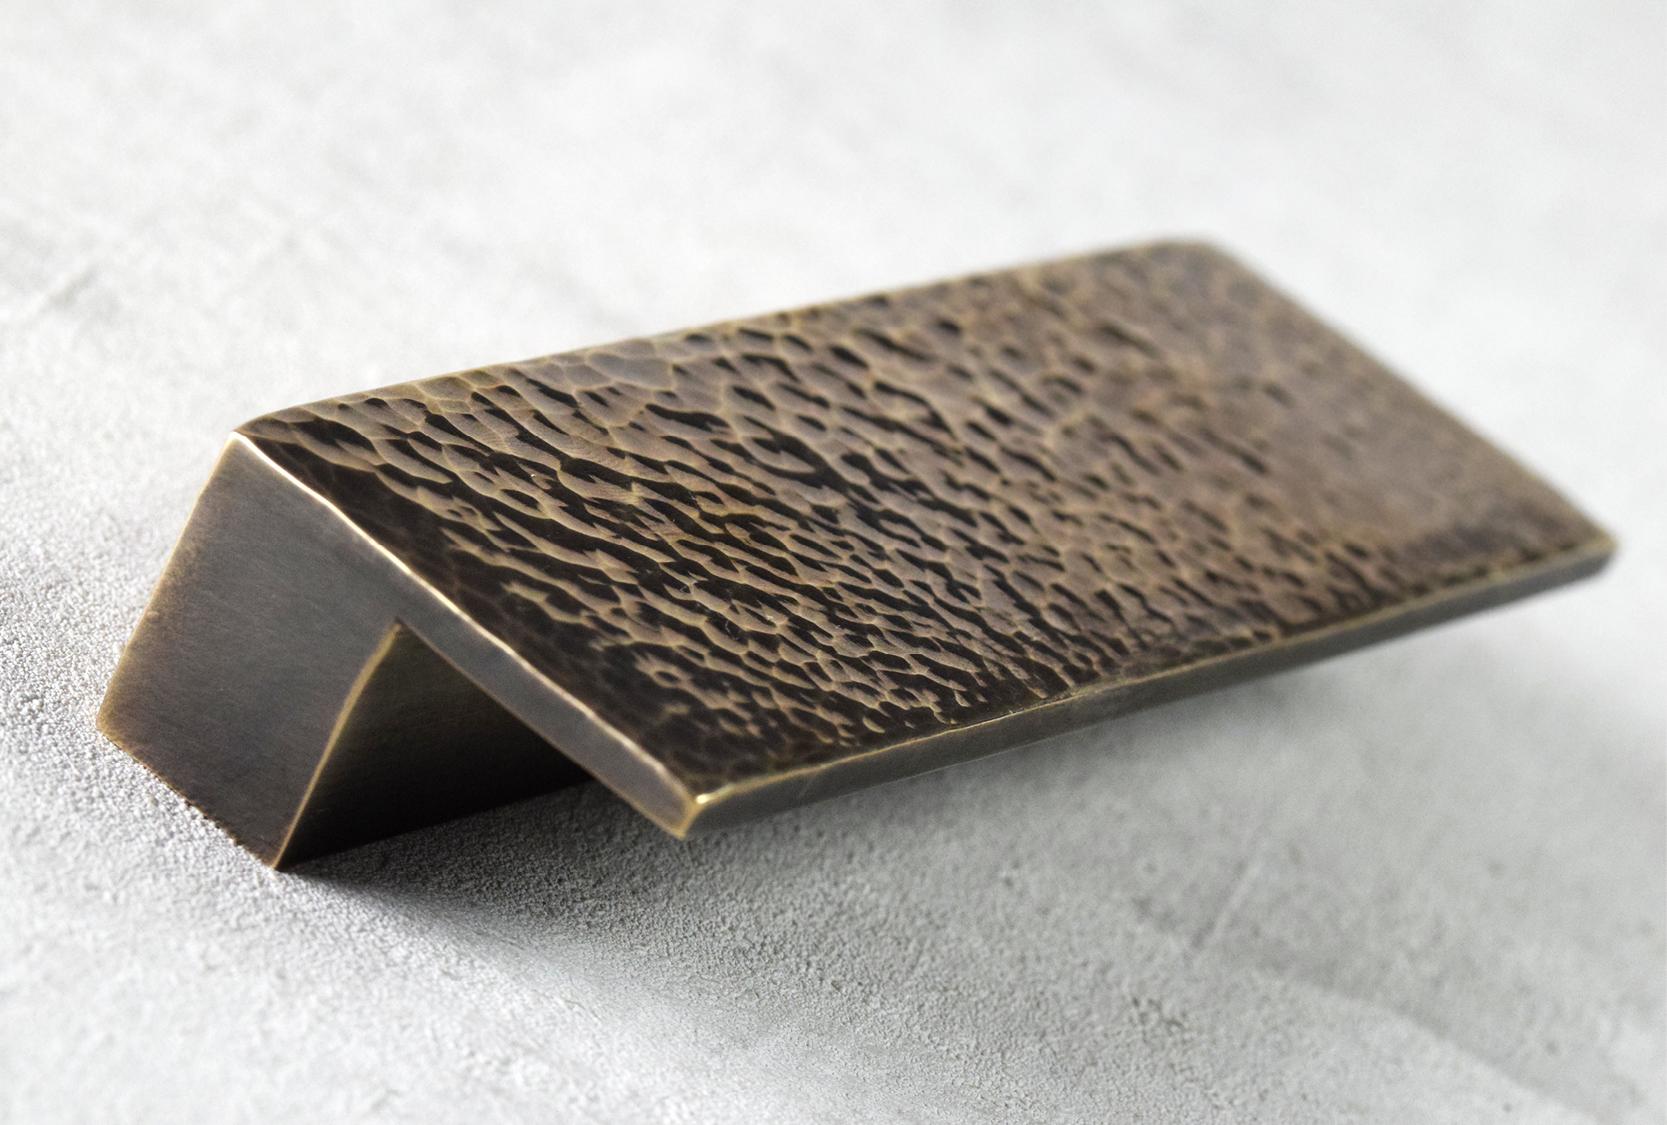 Image of a hand hammered ledge cabinet pull. Shown in burnished brass metal to really bring out the detail.